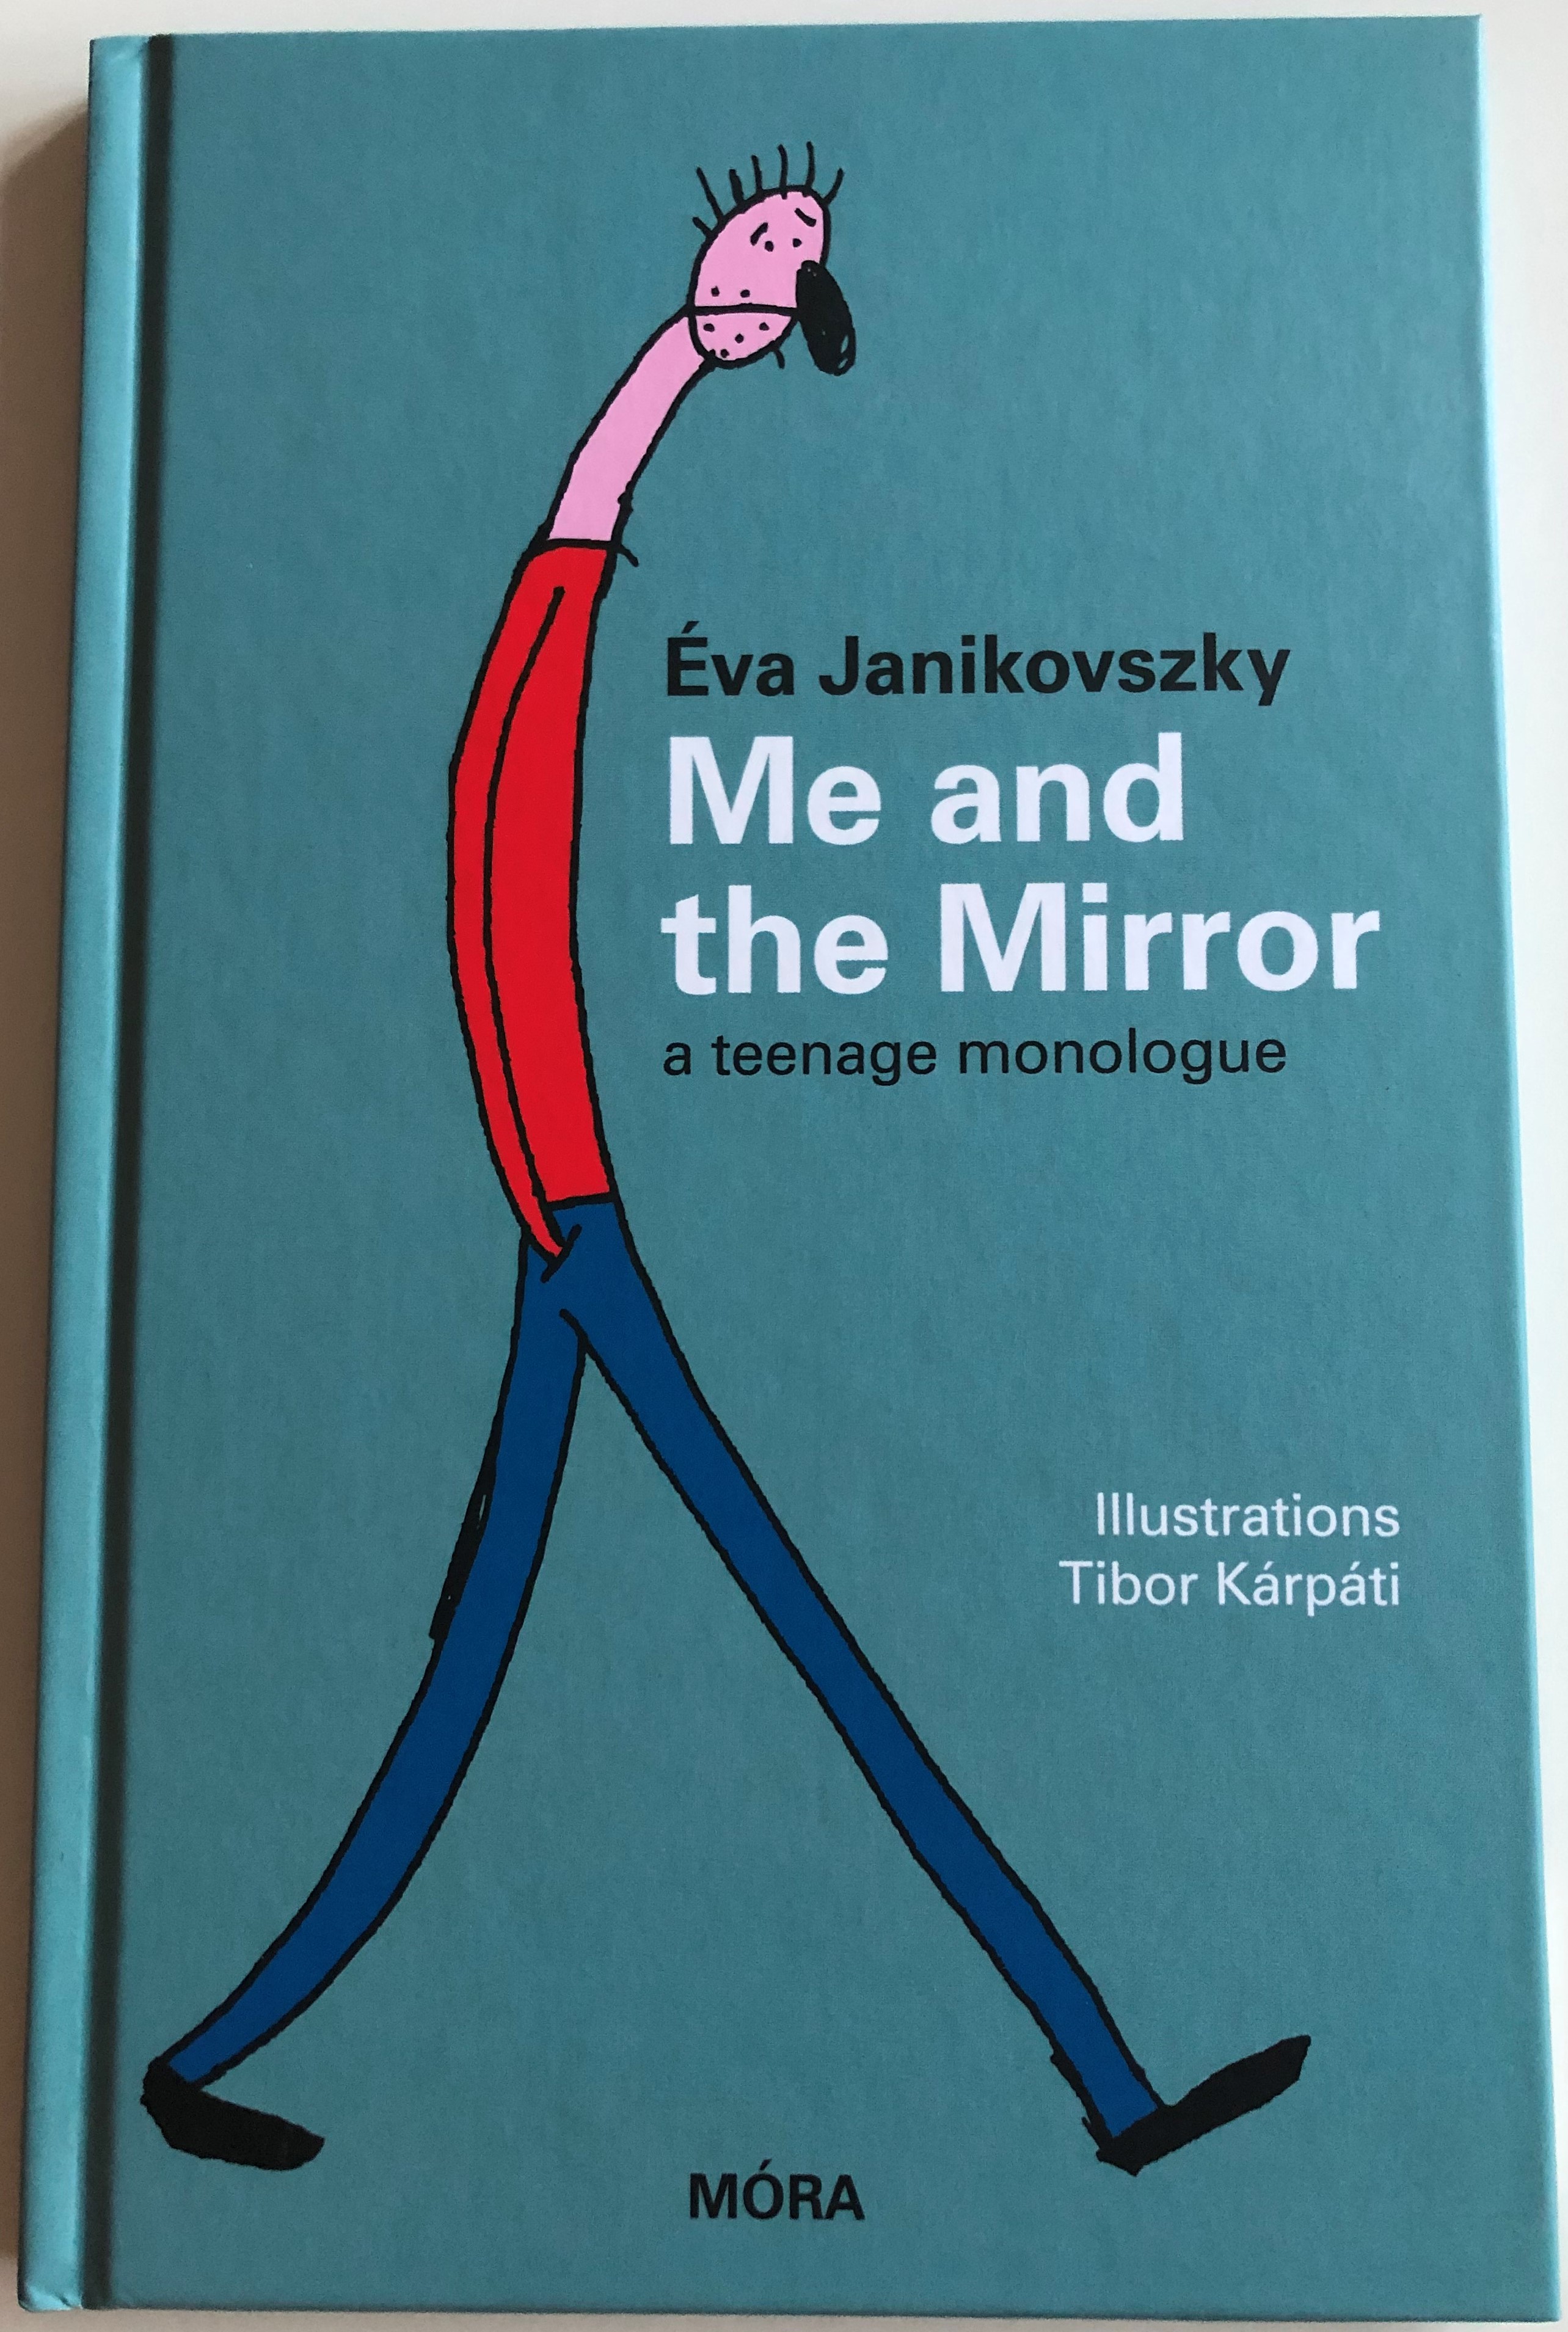 Me and the Mirror - a teenage monologue by Éva Janikovszky 1.JPG